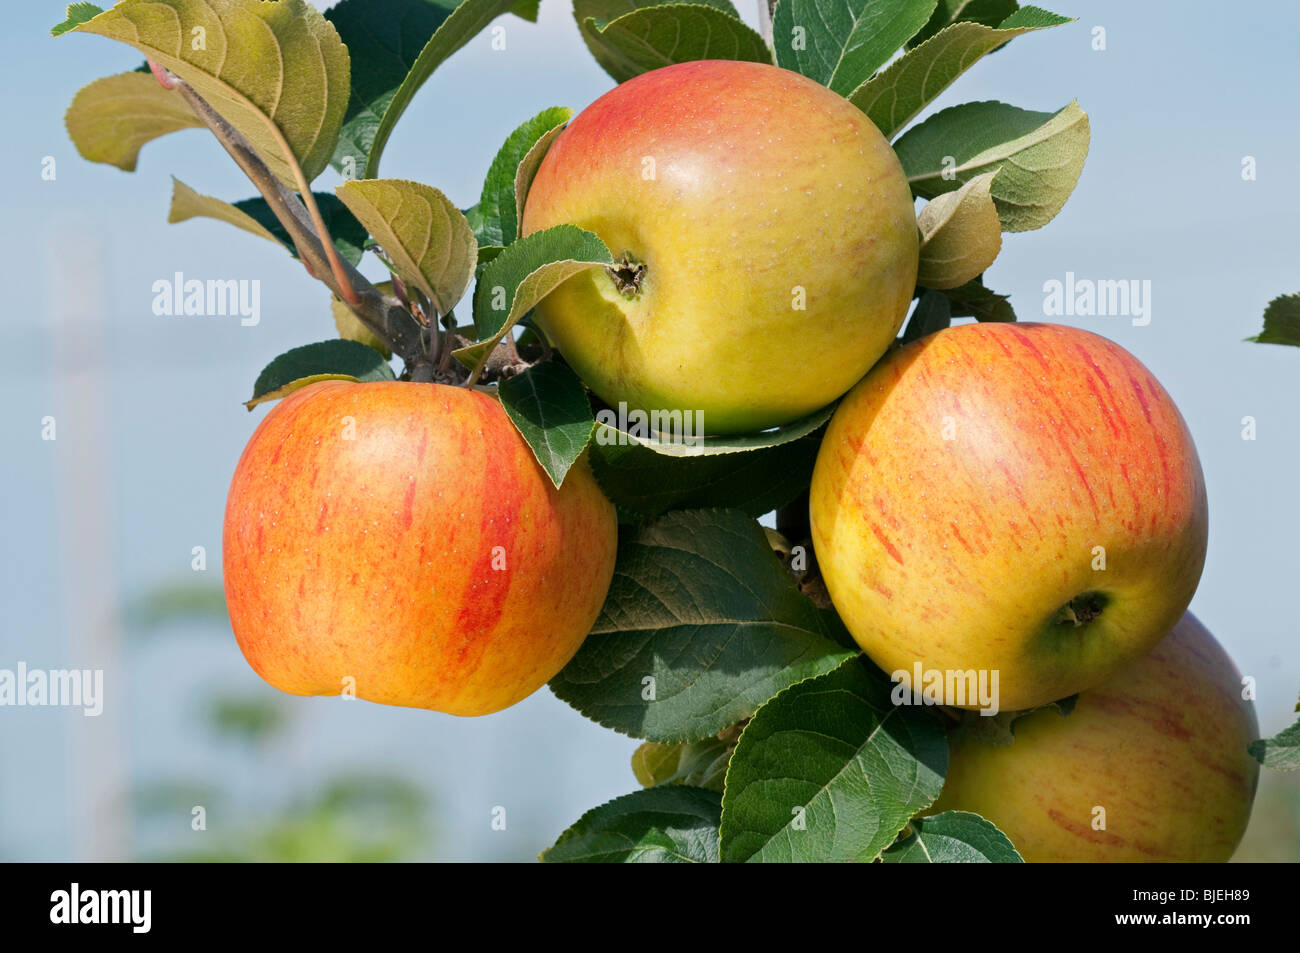 Domestic Apple (Malus domestica), variety: King of the Pippins, apples on a tree. Stock Photo